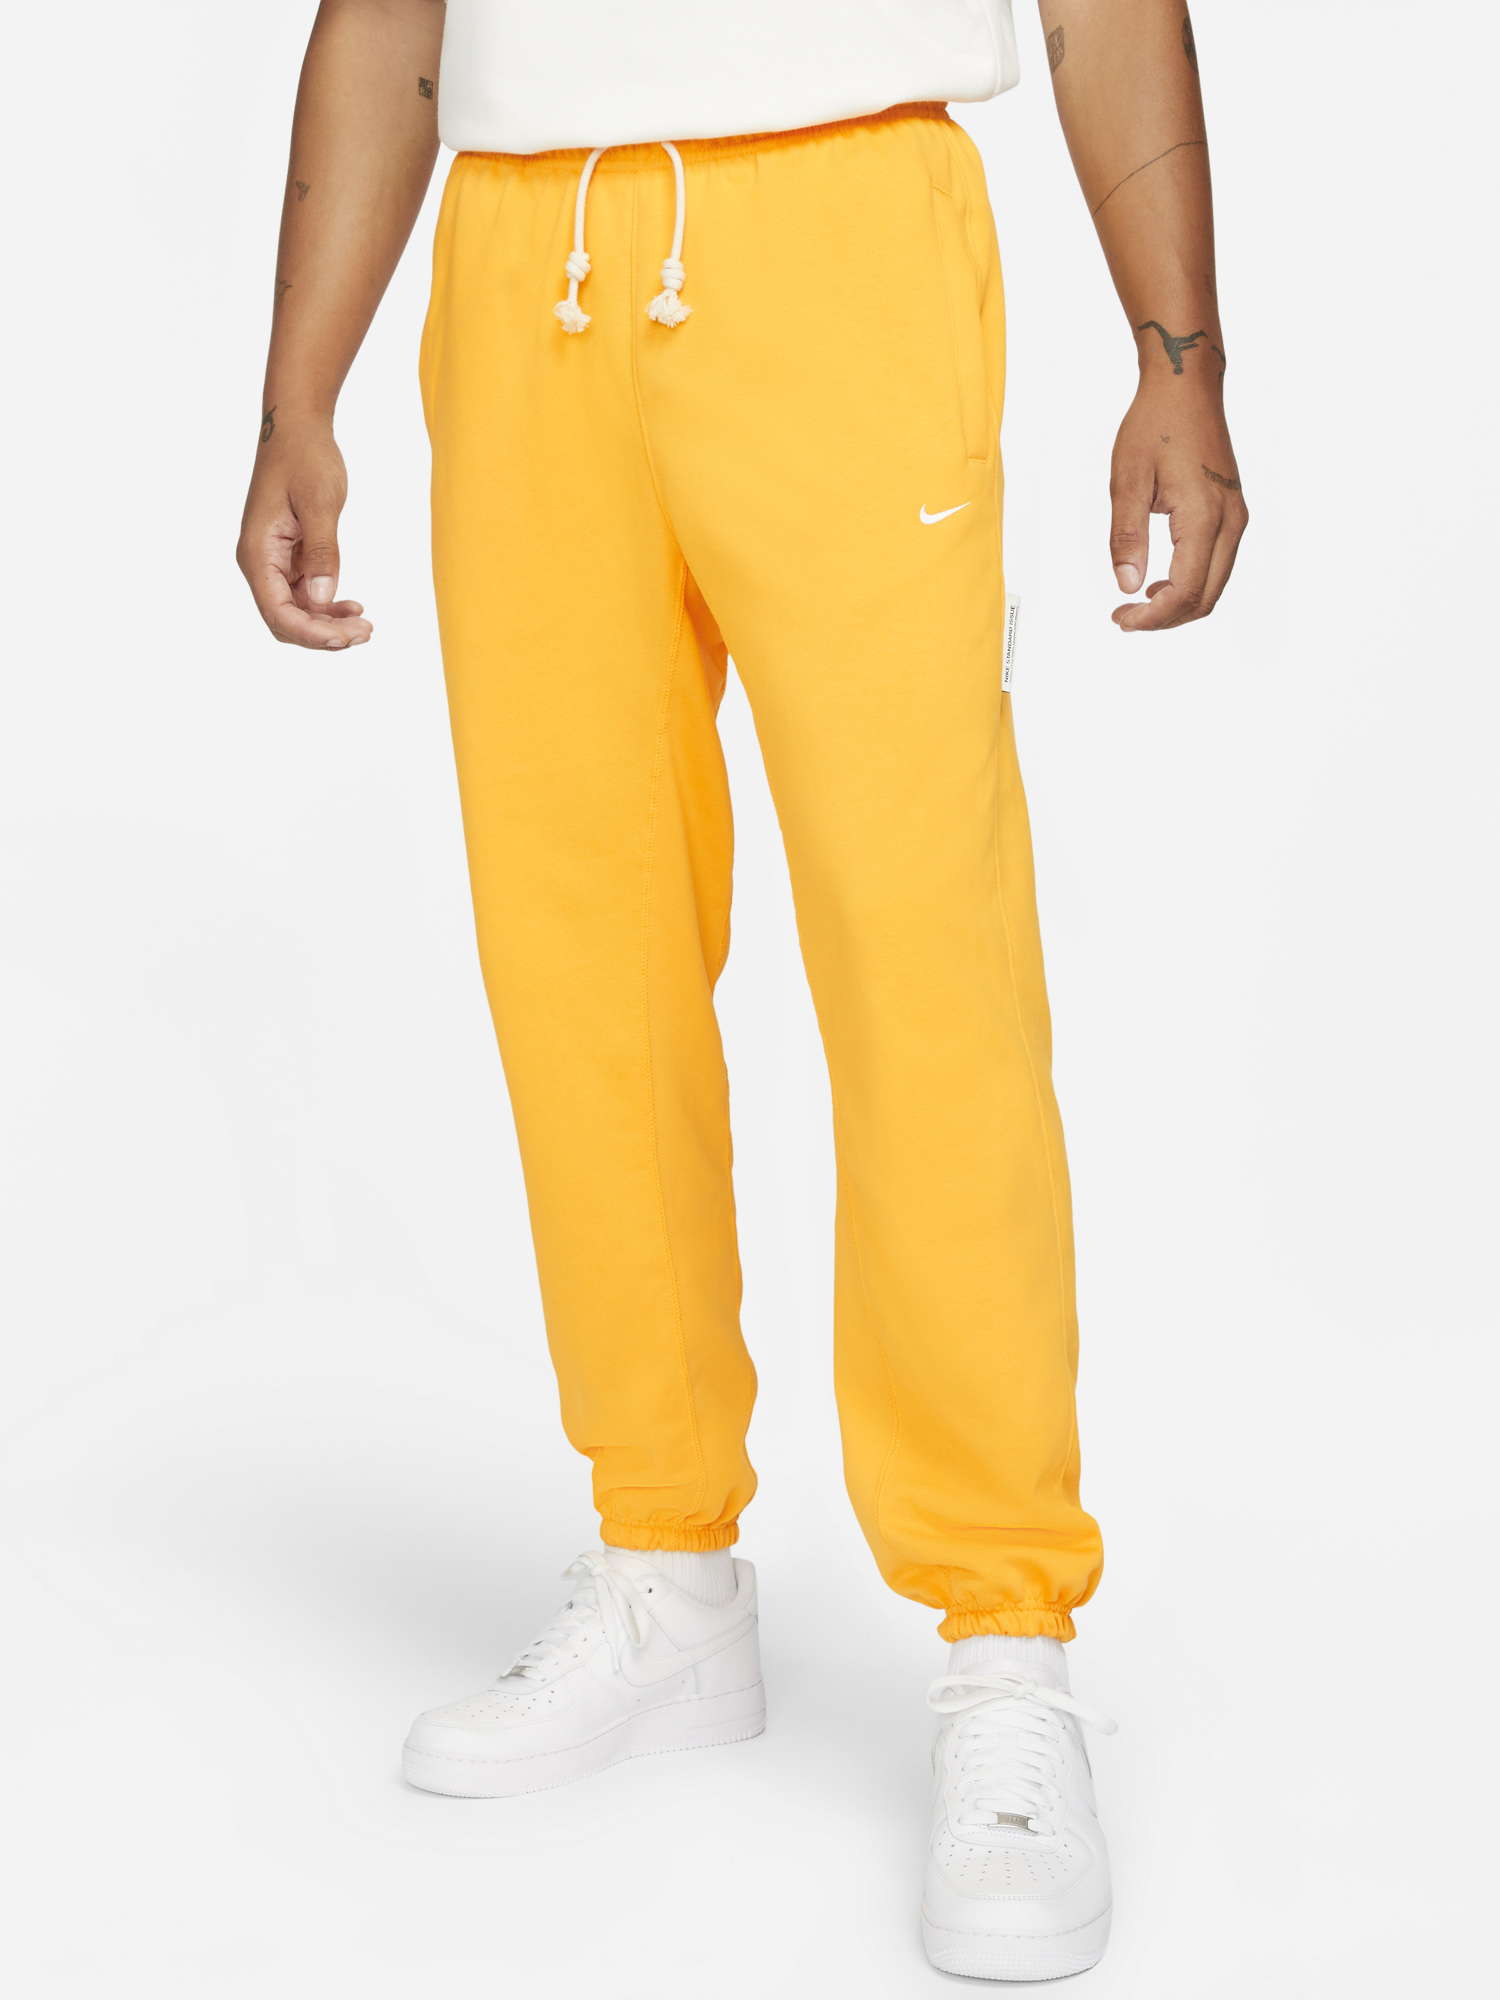 Nike Dunk Low Goldenrod Shirts Hats Clothing Outfits